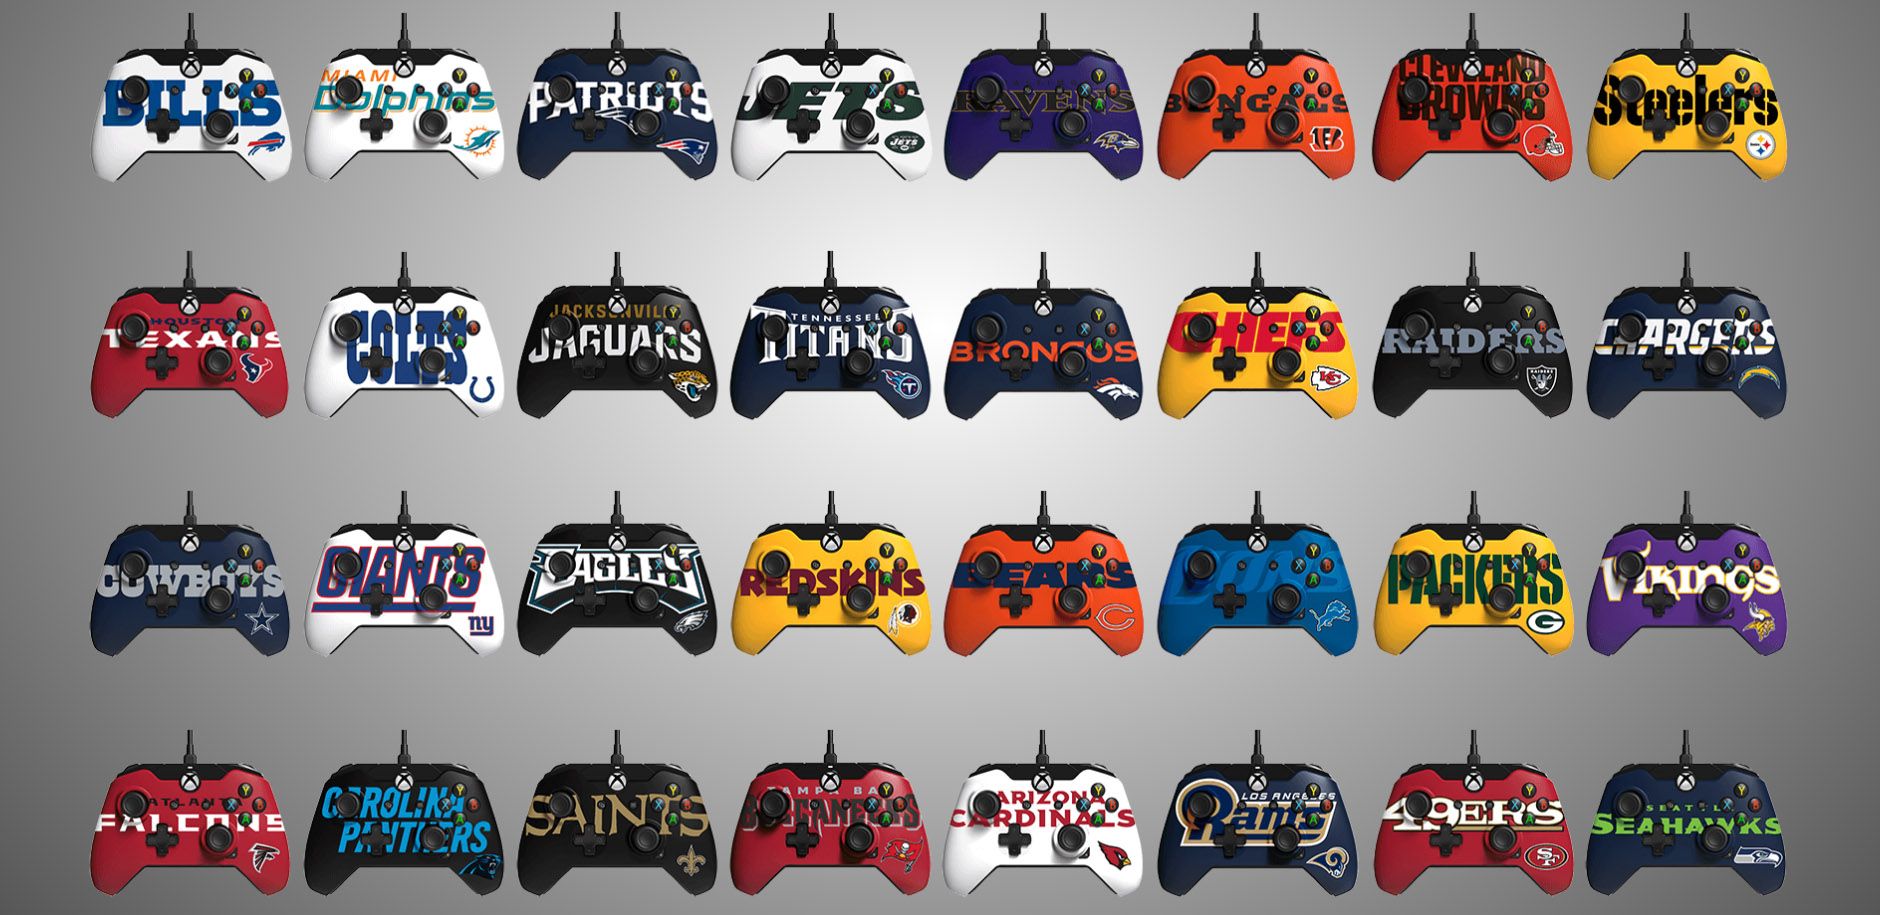 PDP Xbox One Controller - FACEPLATES FOR 32 NFL TEAMS